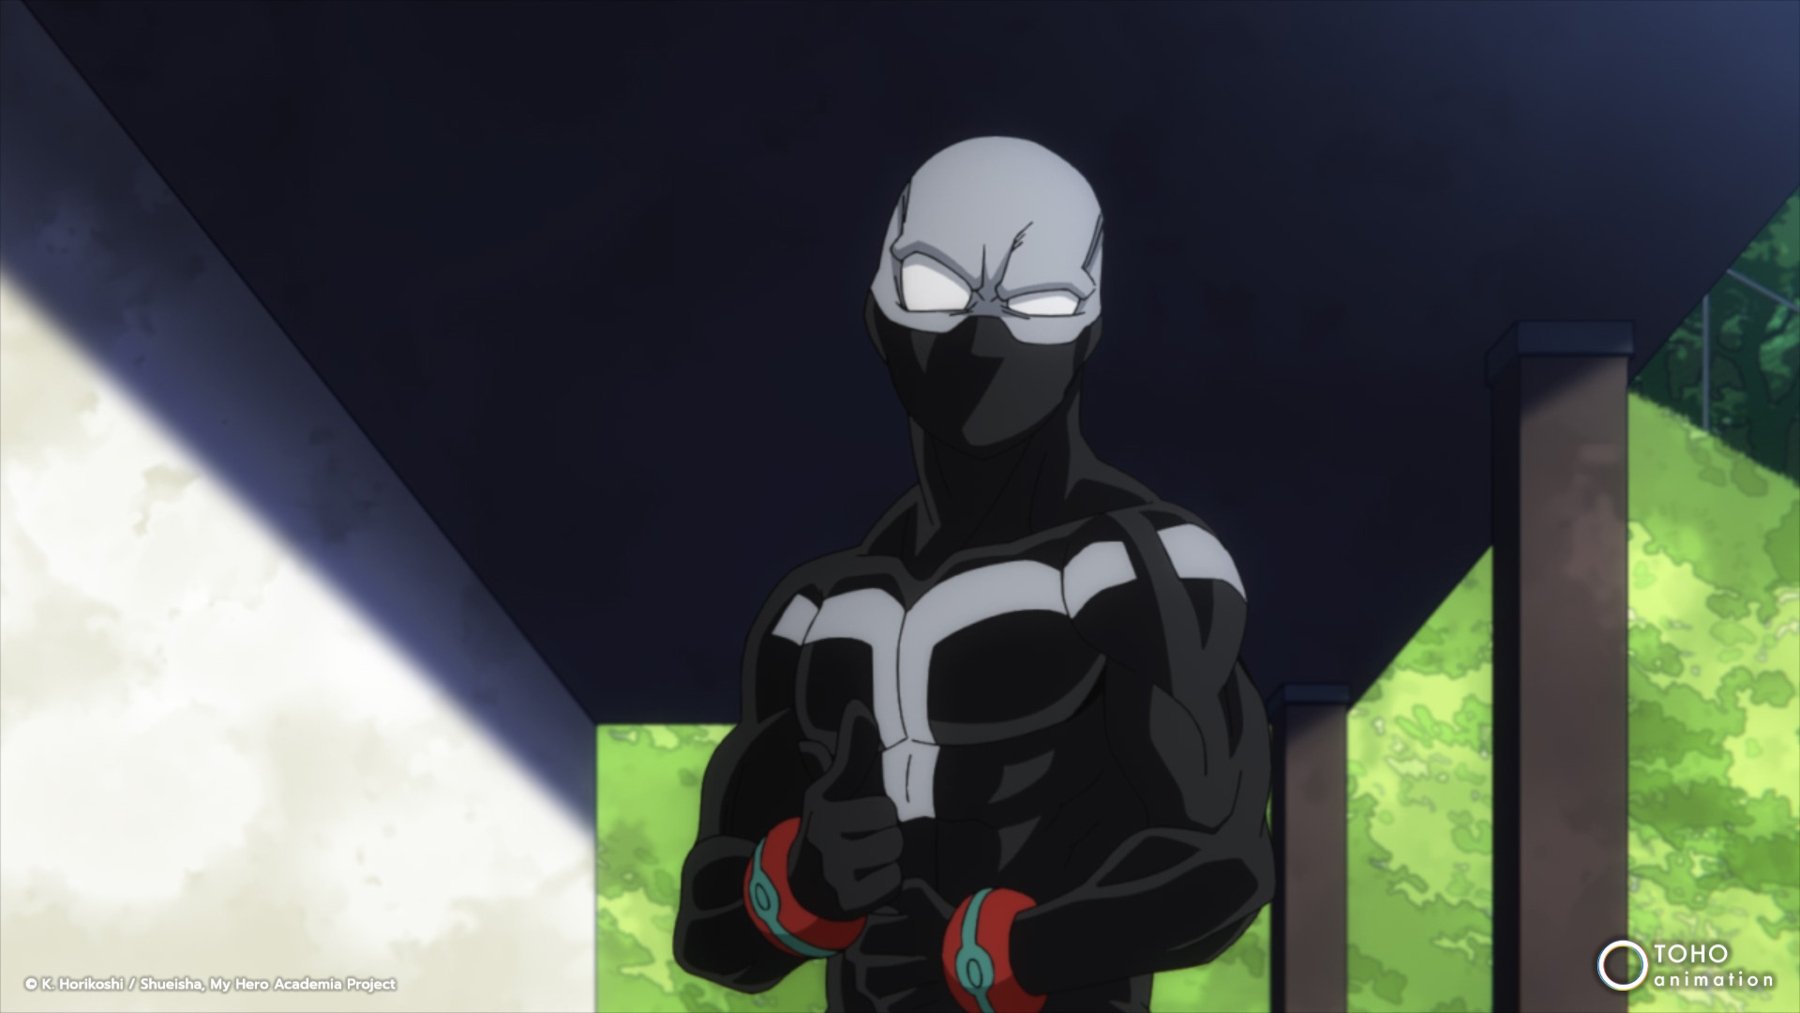 Twice in 'My Hero Academia' Season 6 for our article about the major moments from the manga. He's giving someone a thumbs up.